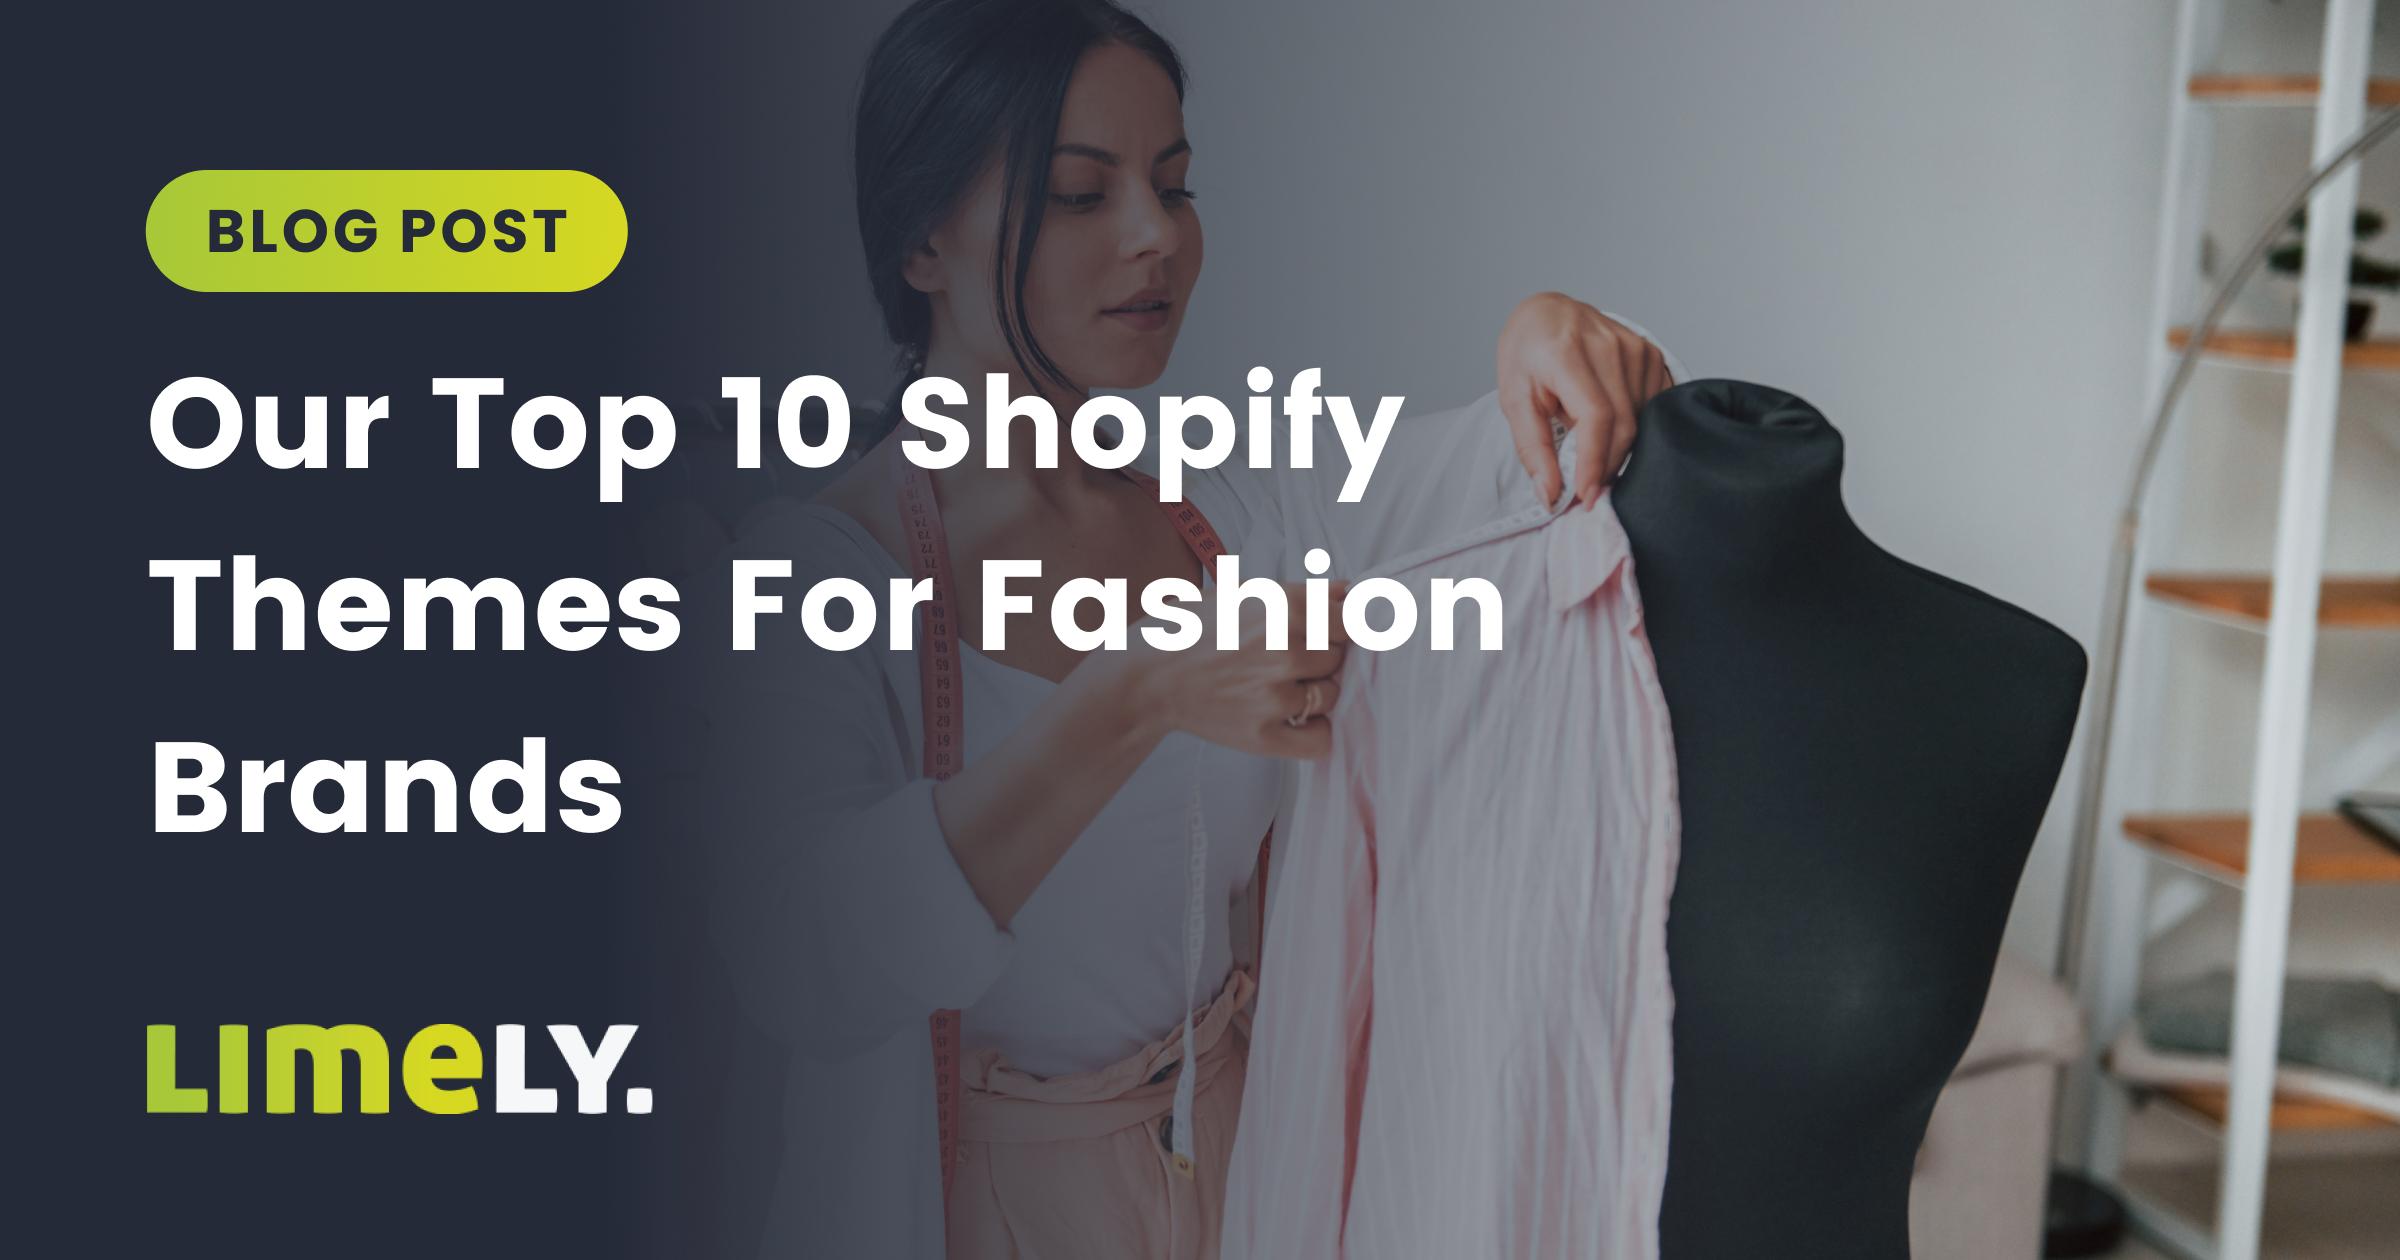 Our Top 10 Shopify Themes For Fashion Brands - Limely